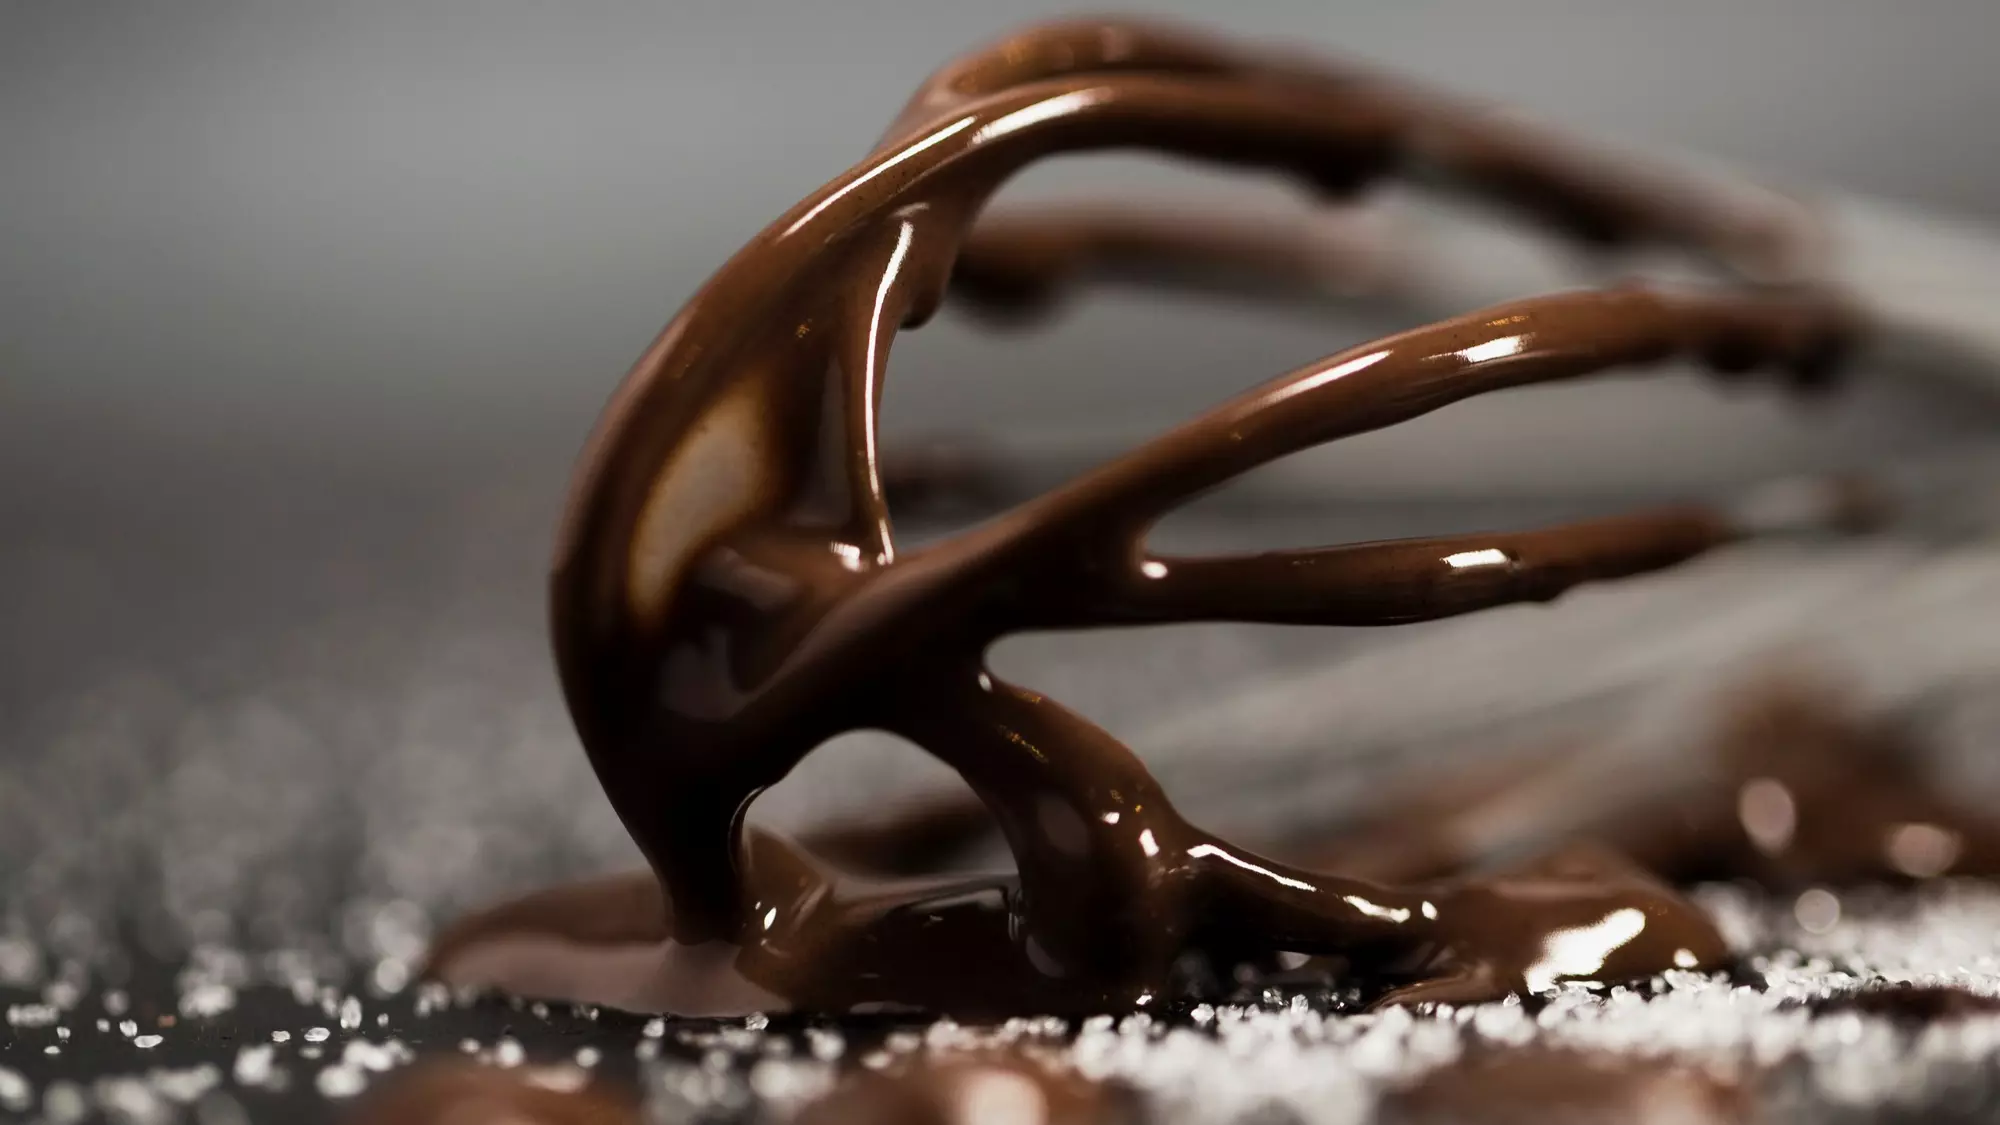 How to melt chocolate chips? Guide